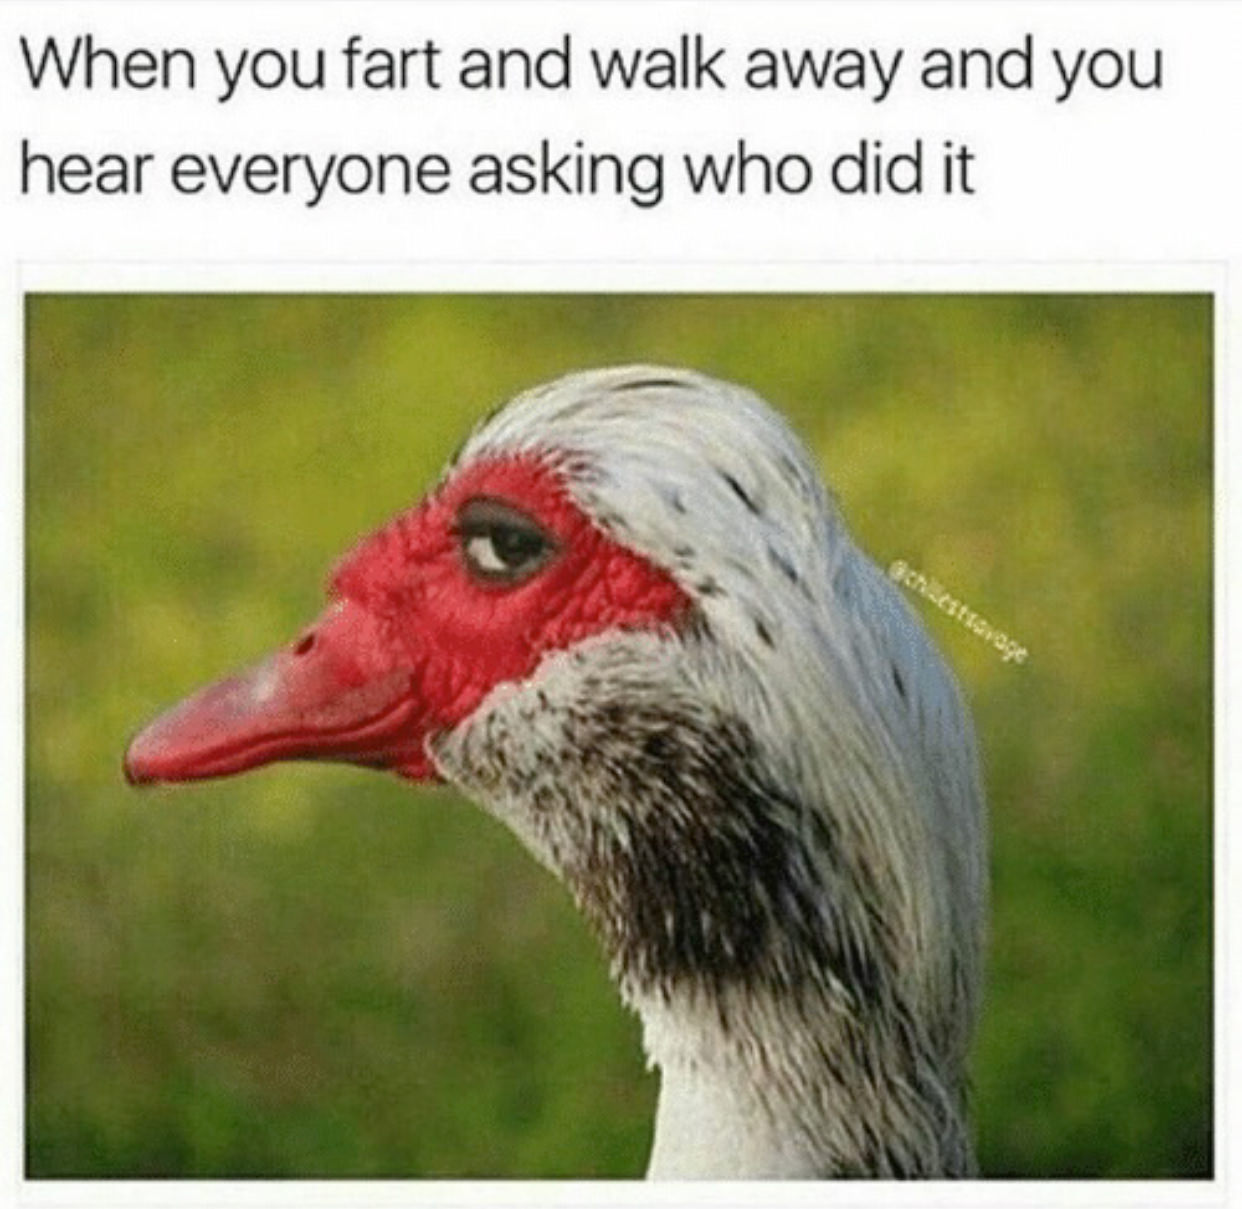 memes - muscovy duck meme - When you fart and walk away and you hear everyone asking who did it